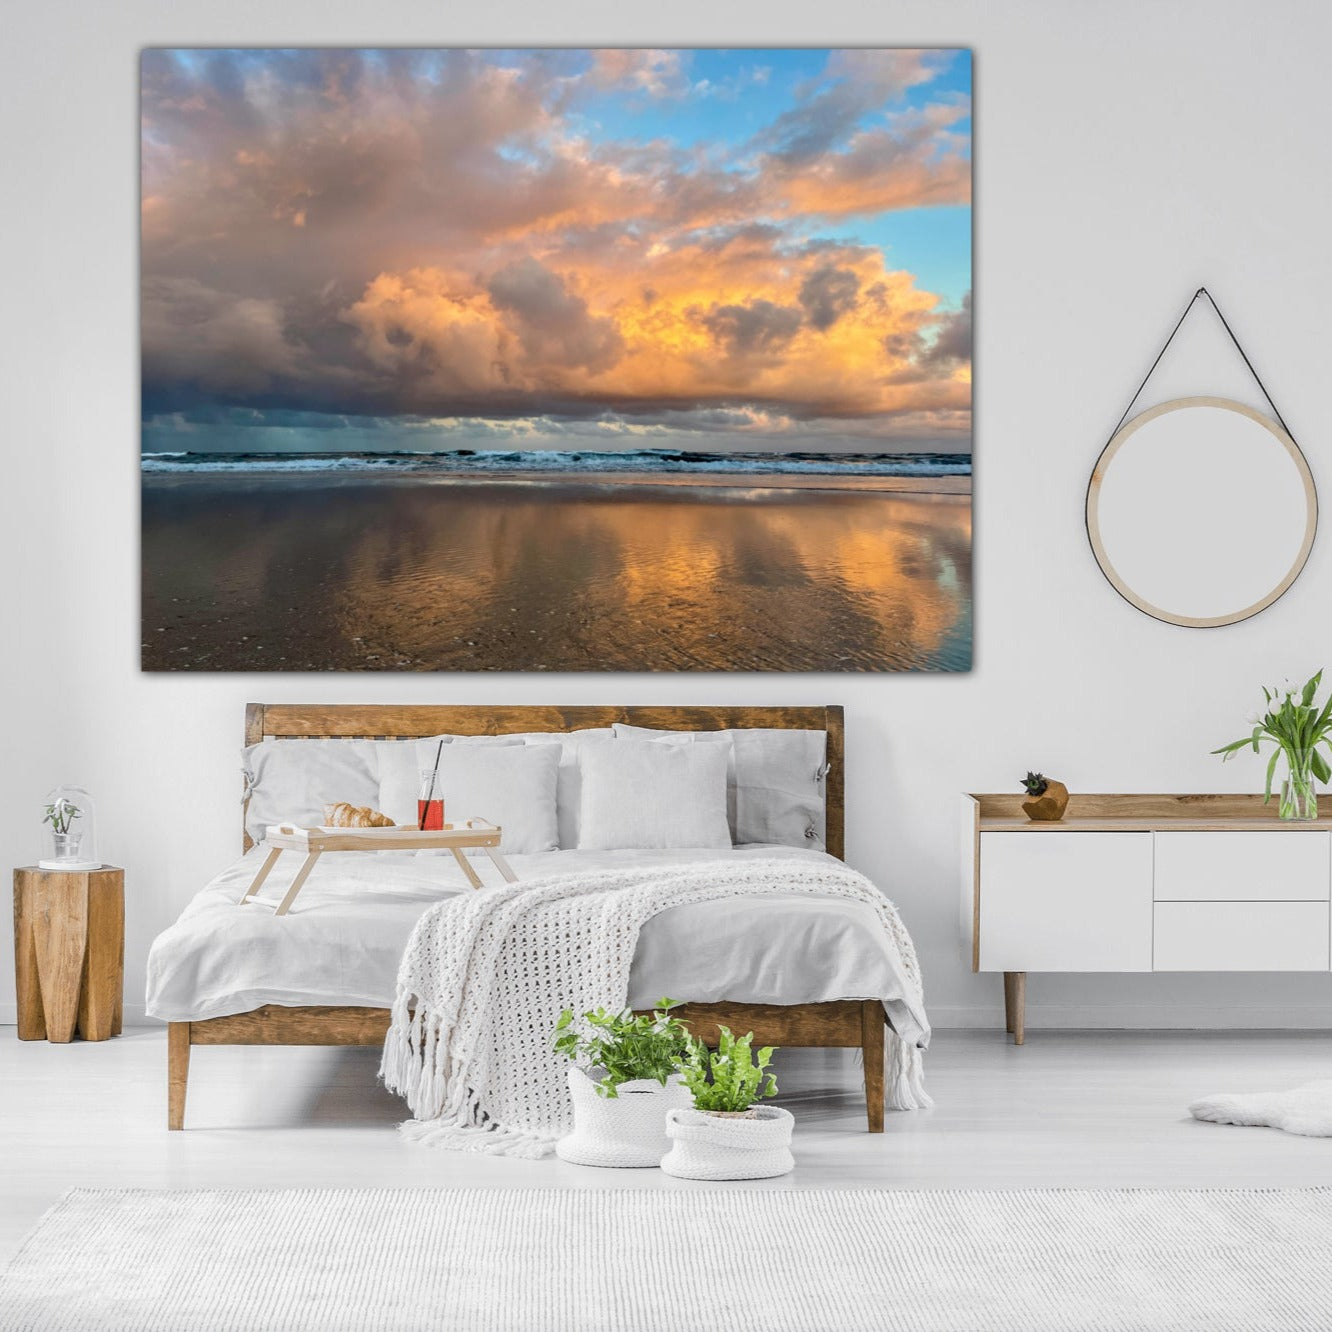 florida beach sunset canvas print for your bedroom by Jacqueline MB Designs